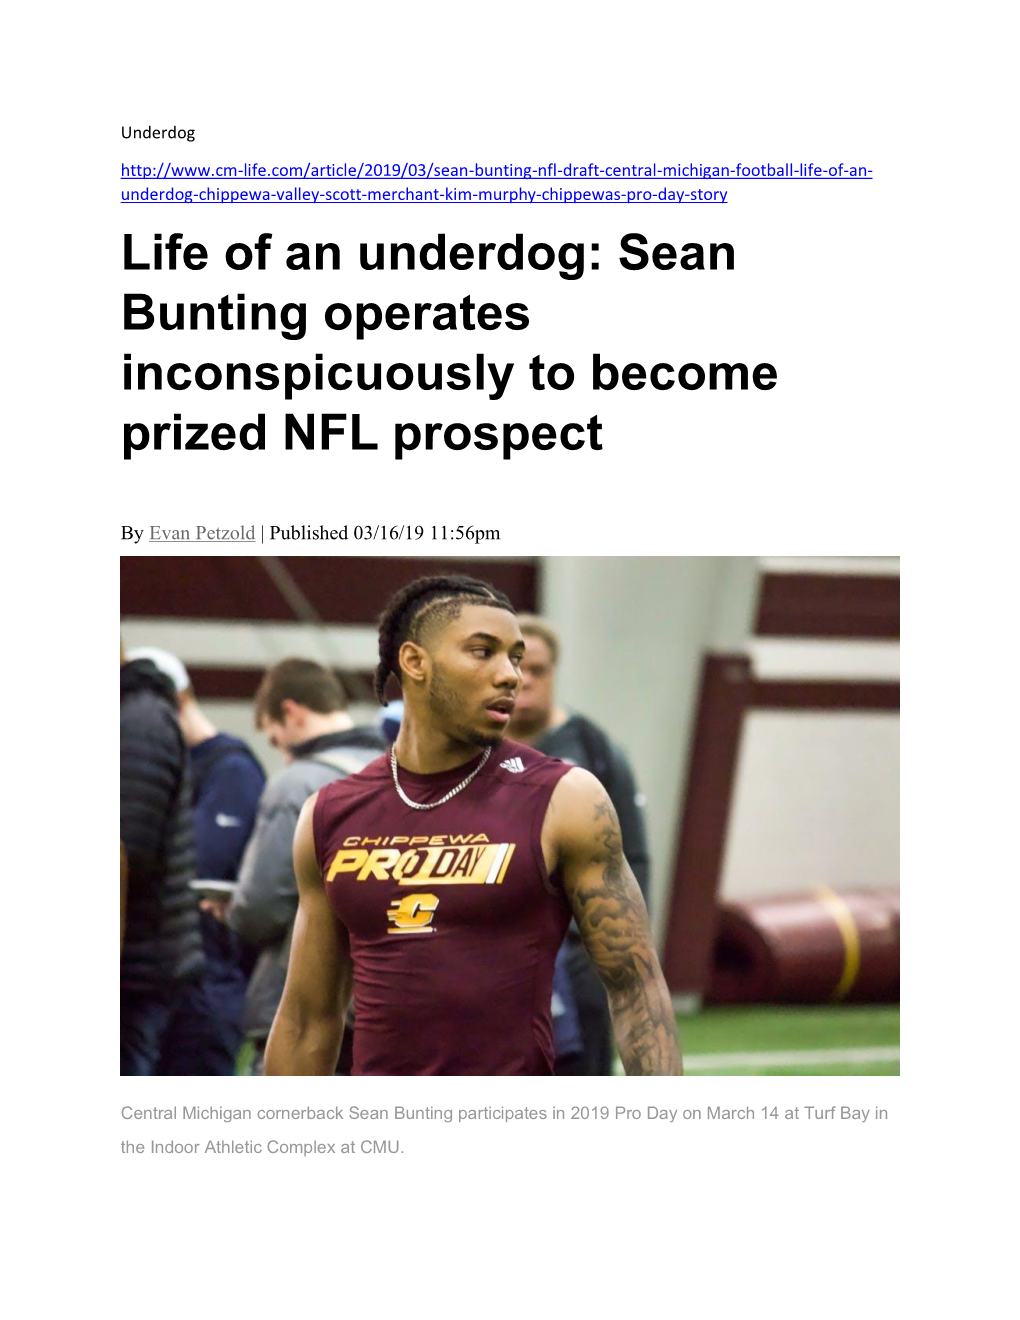 Sean Bunting Operates Inconspicuously to Become Prized NFL Prospect